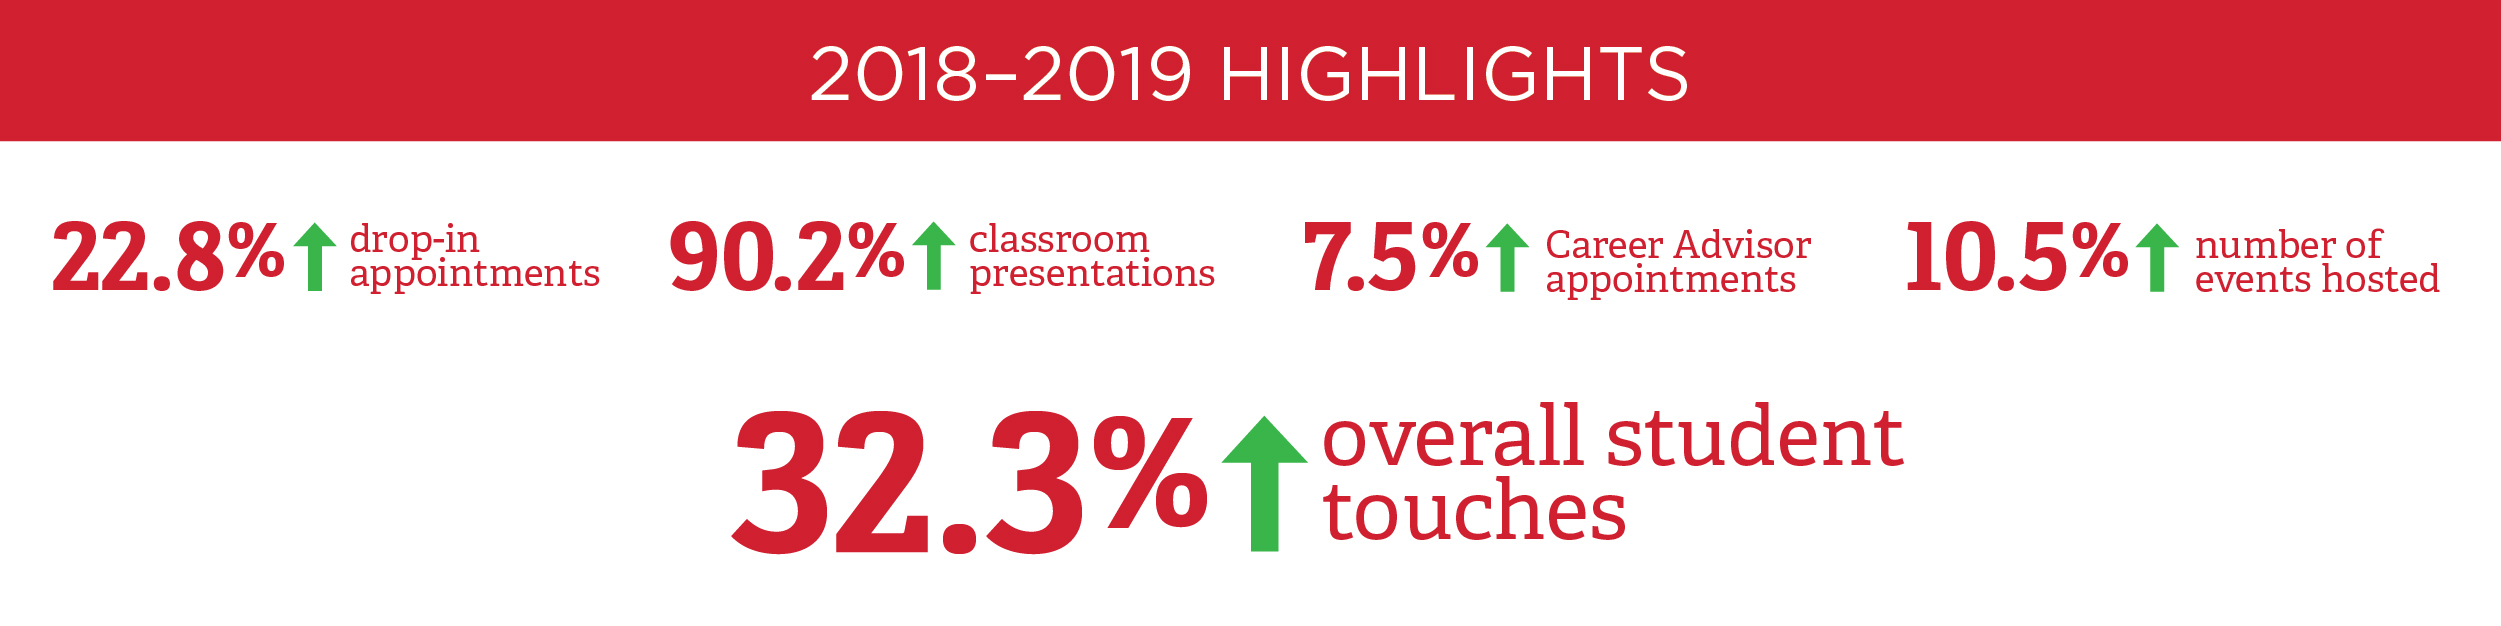 2018–2019 Highlights: 22.8% increase in drop-in appointments. 90.2% increase in classroom presentations. 7.5% increase in Career Advisor appointments. 10.5% increase in number of events hosted. 32.3% increase in overall student touches.